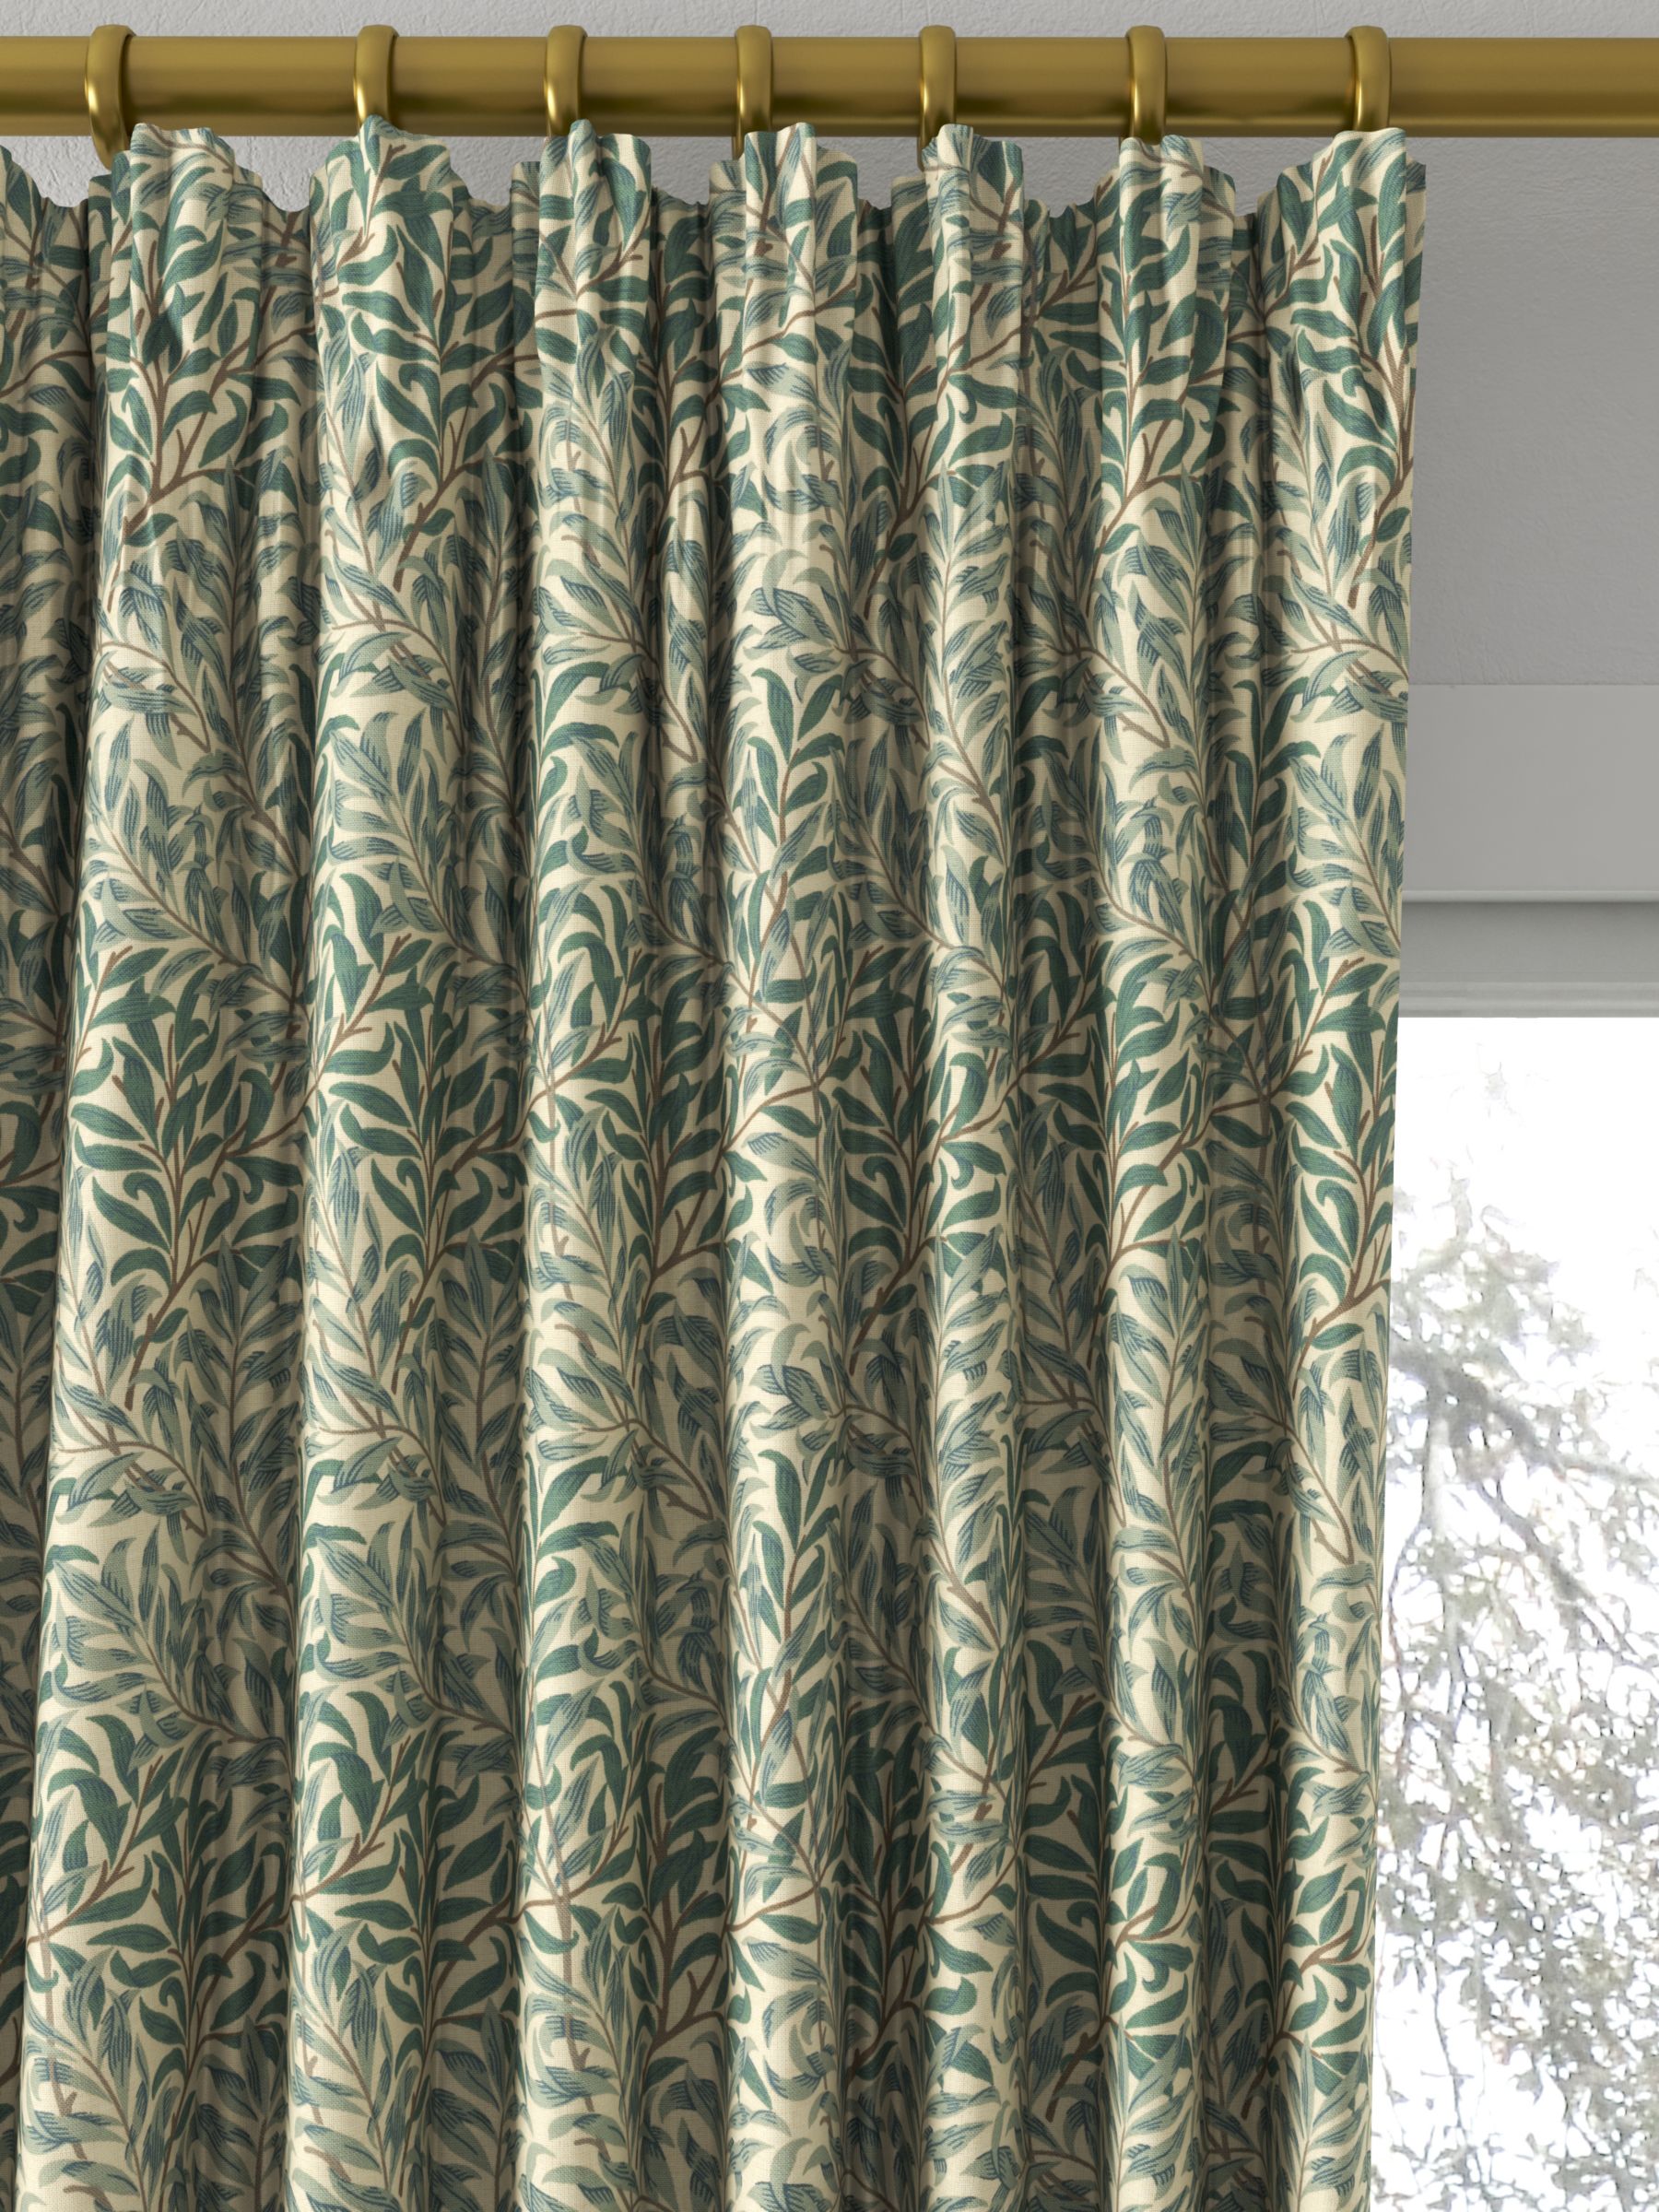 Morris & Co. Willow Boughs Minor Made to Measure Curtains, Privet/Honeycombe